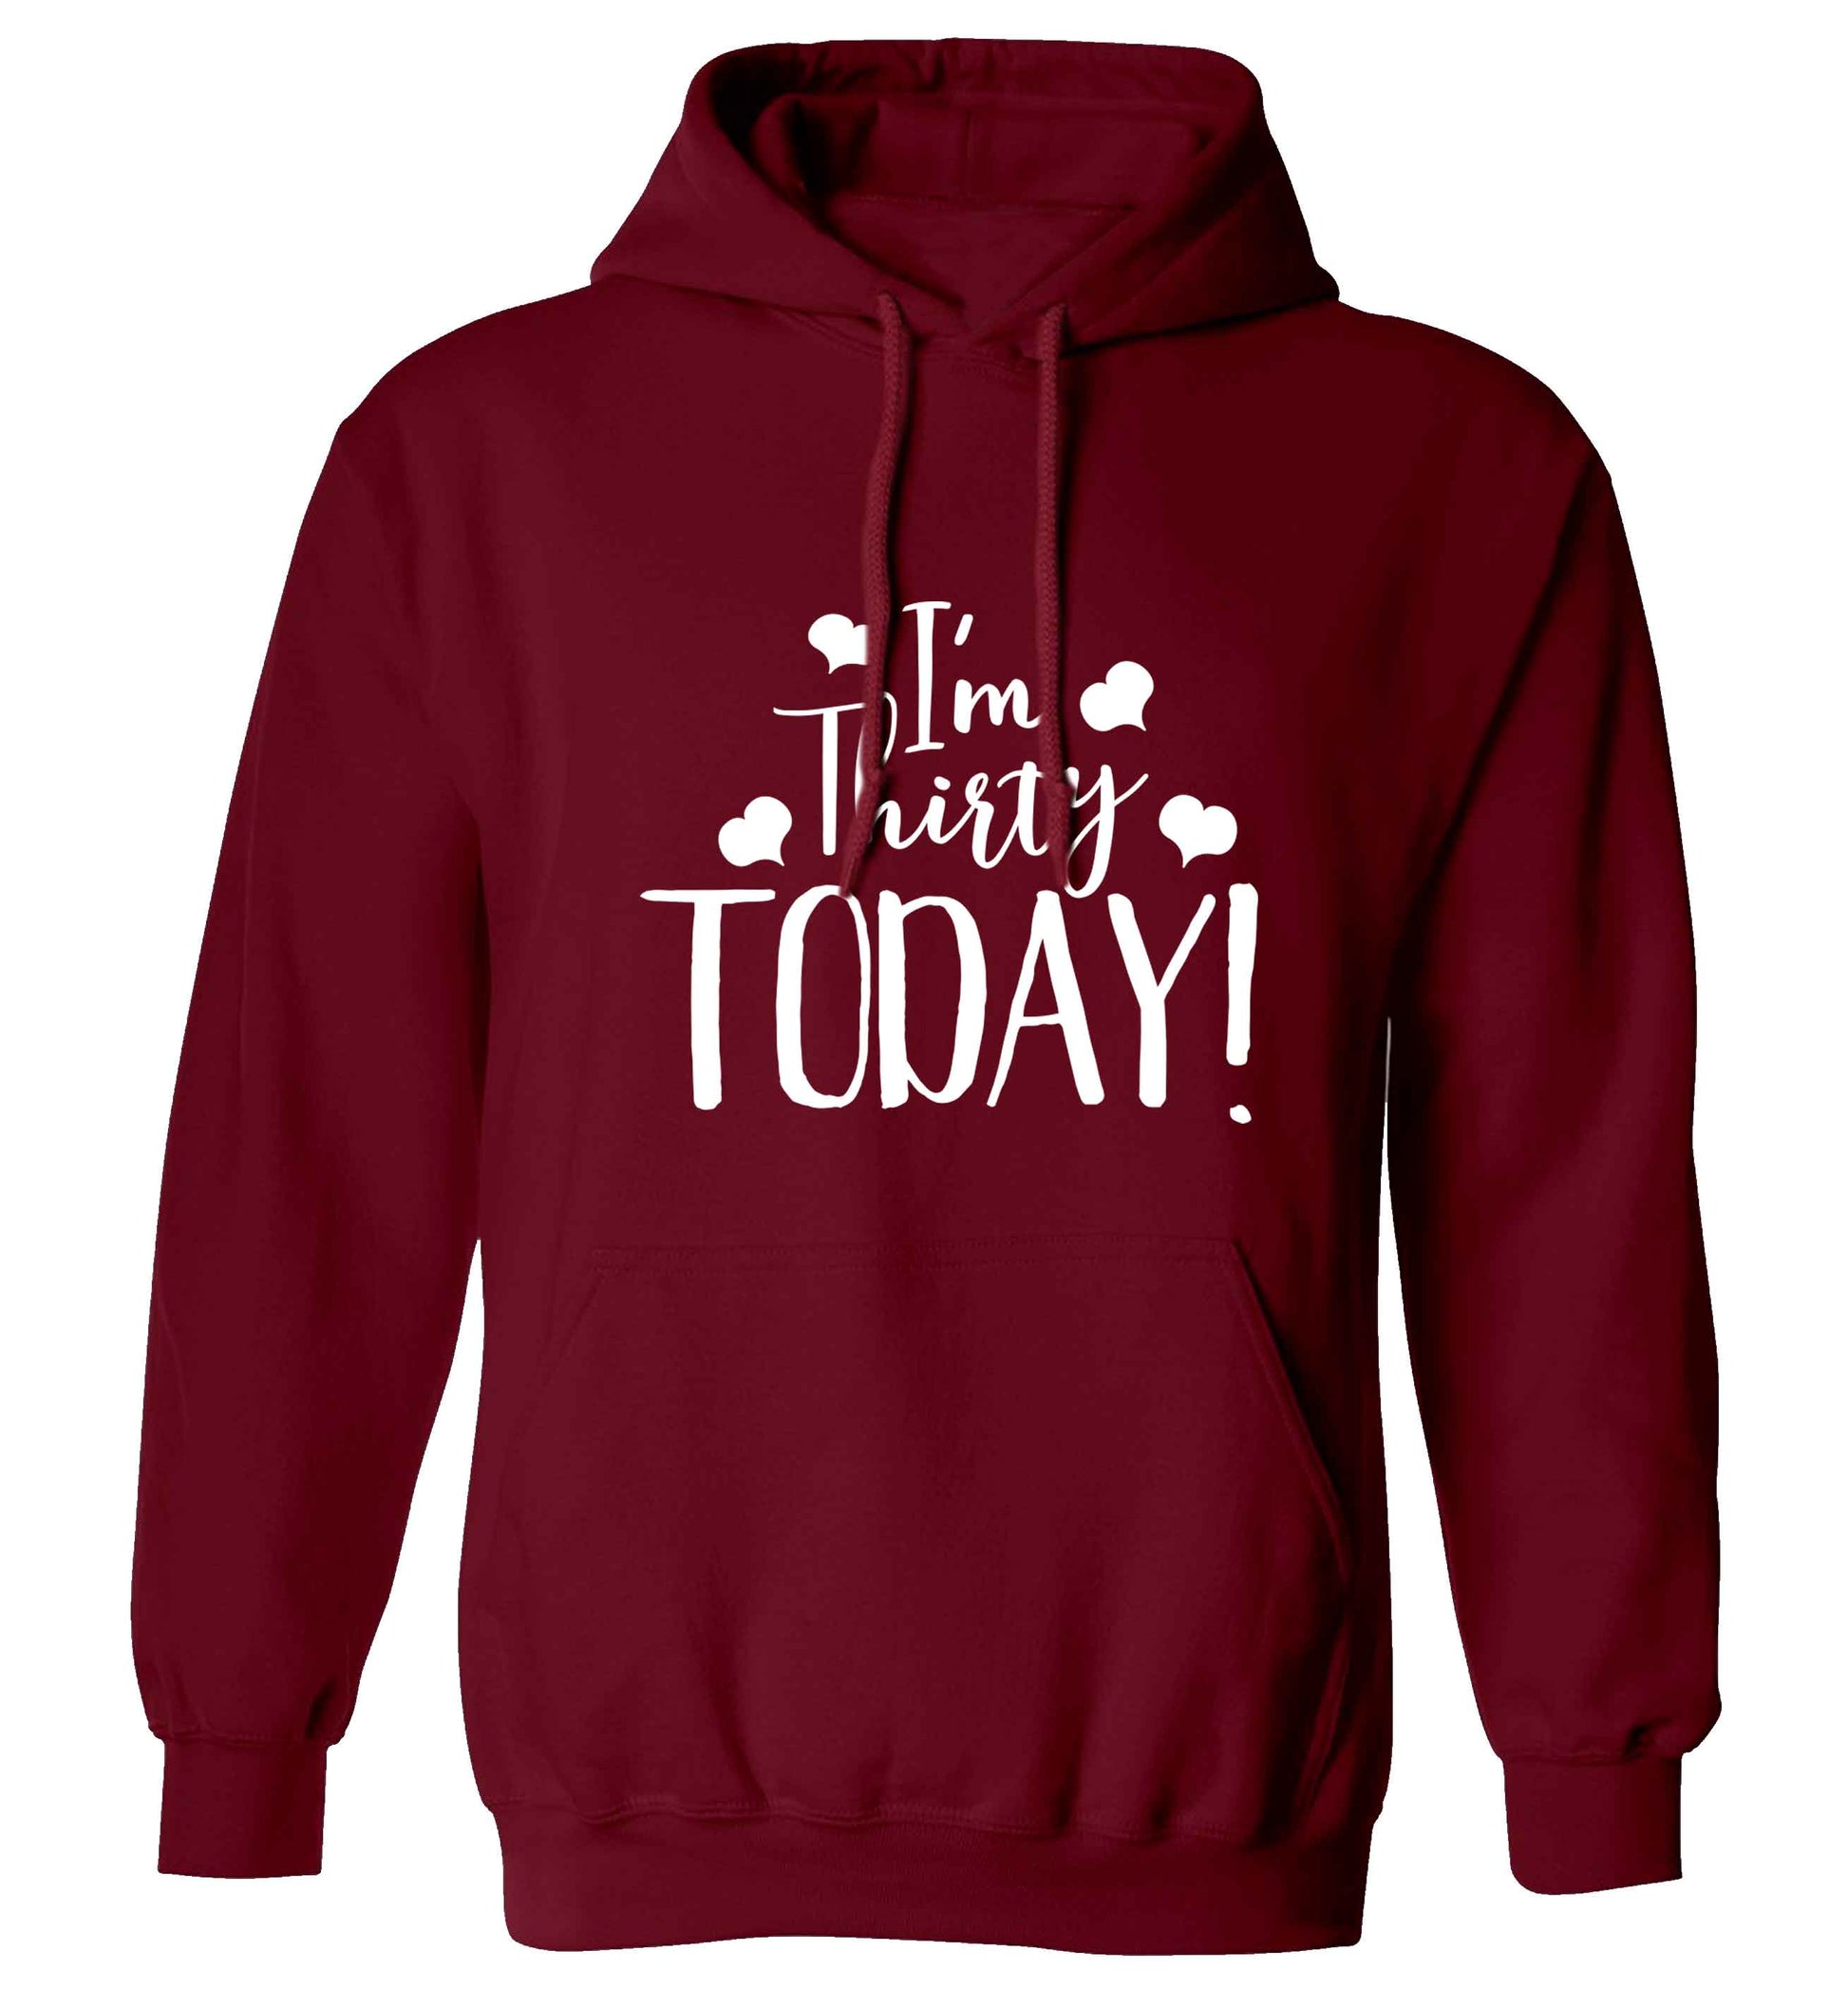 I'm thirty today! adults unisex maroon hoodie 2XL